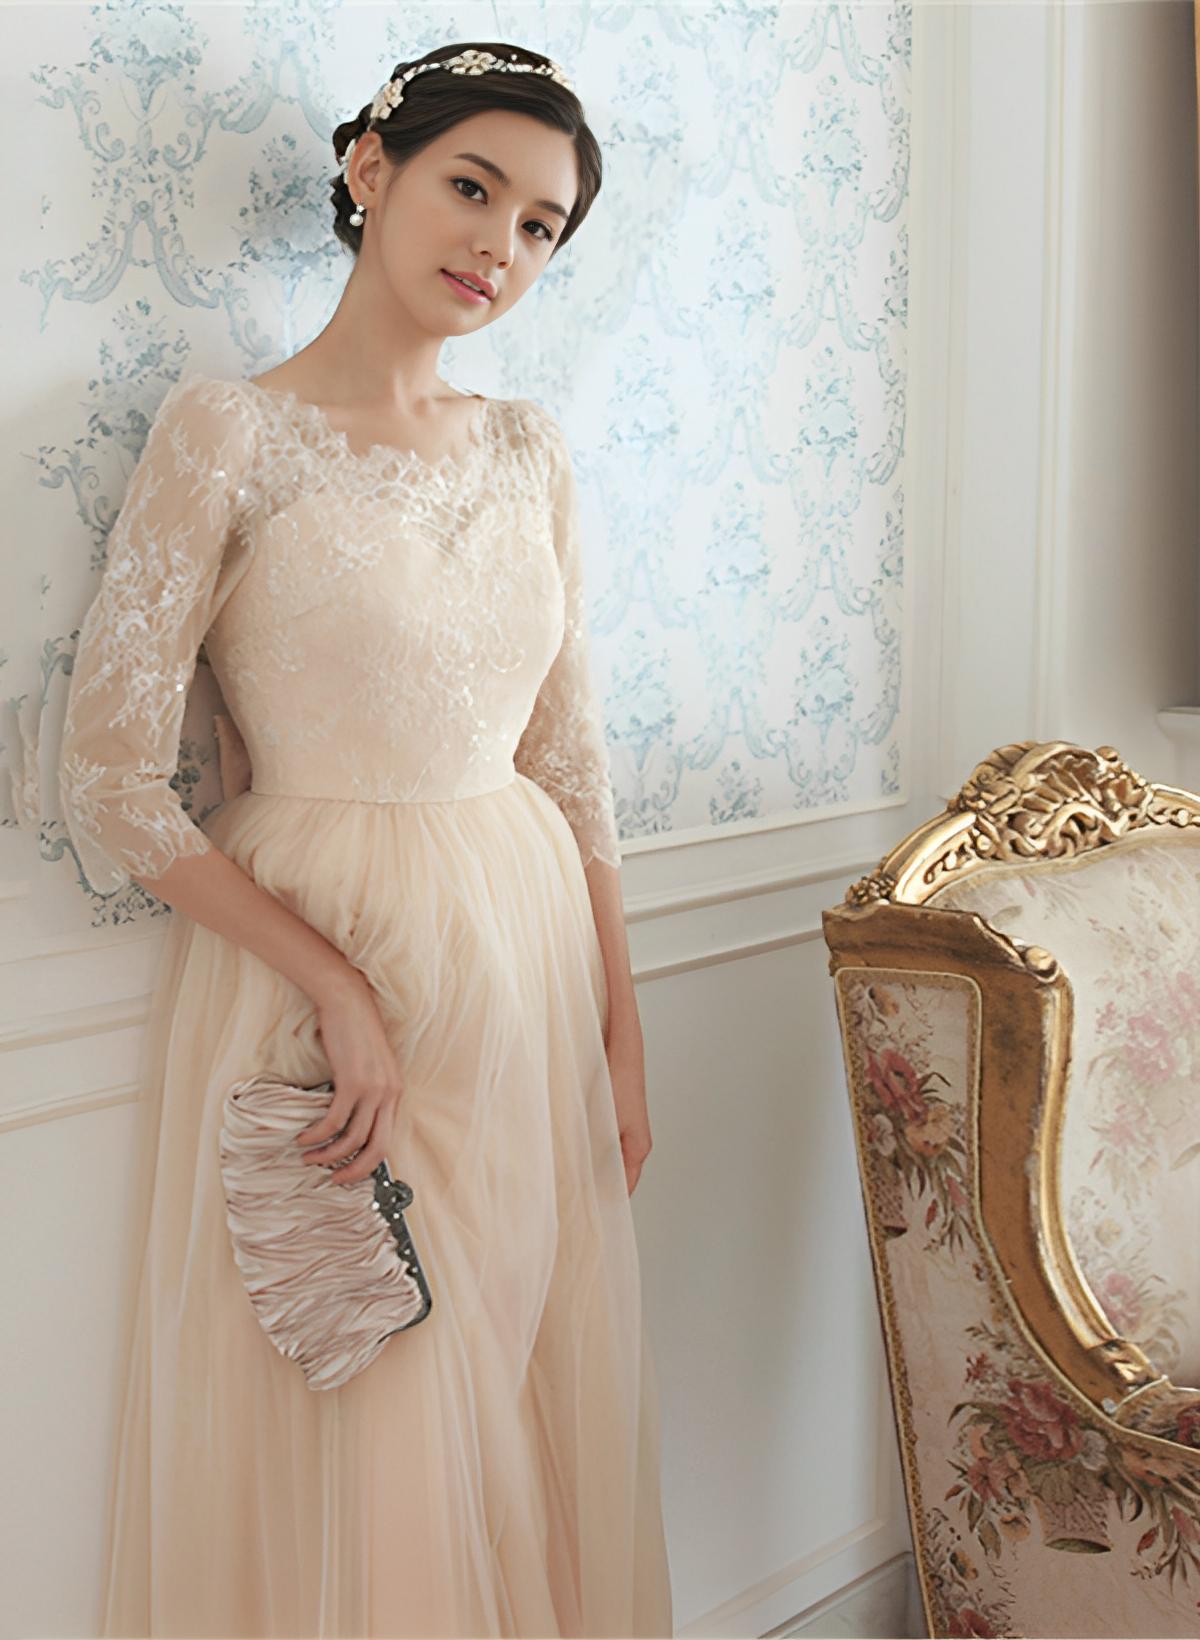 A-Line/Princess 3/4 Sleeve Scoop Neck Ankle-Length Tulle Bridesmaid Dresses With Lace Pleated